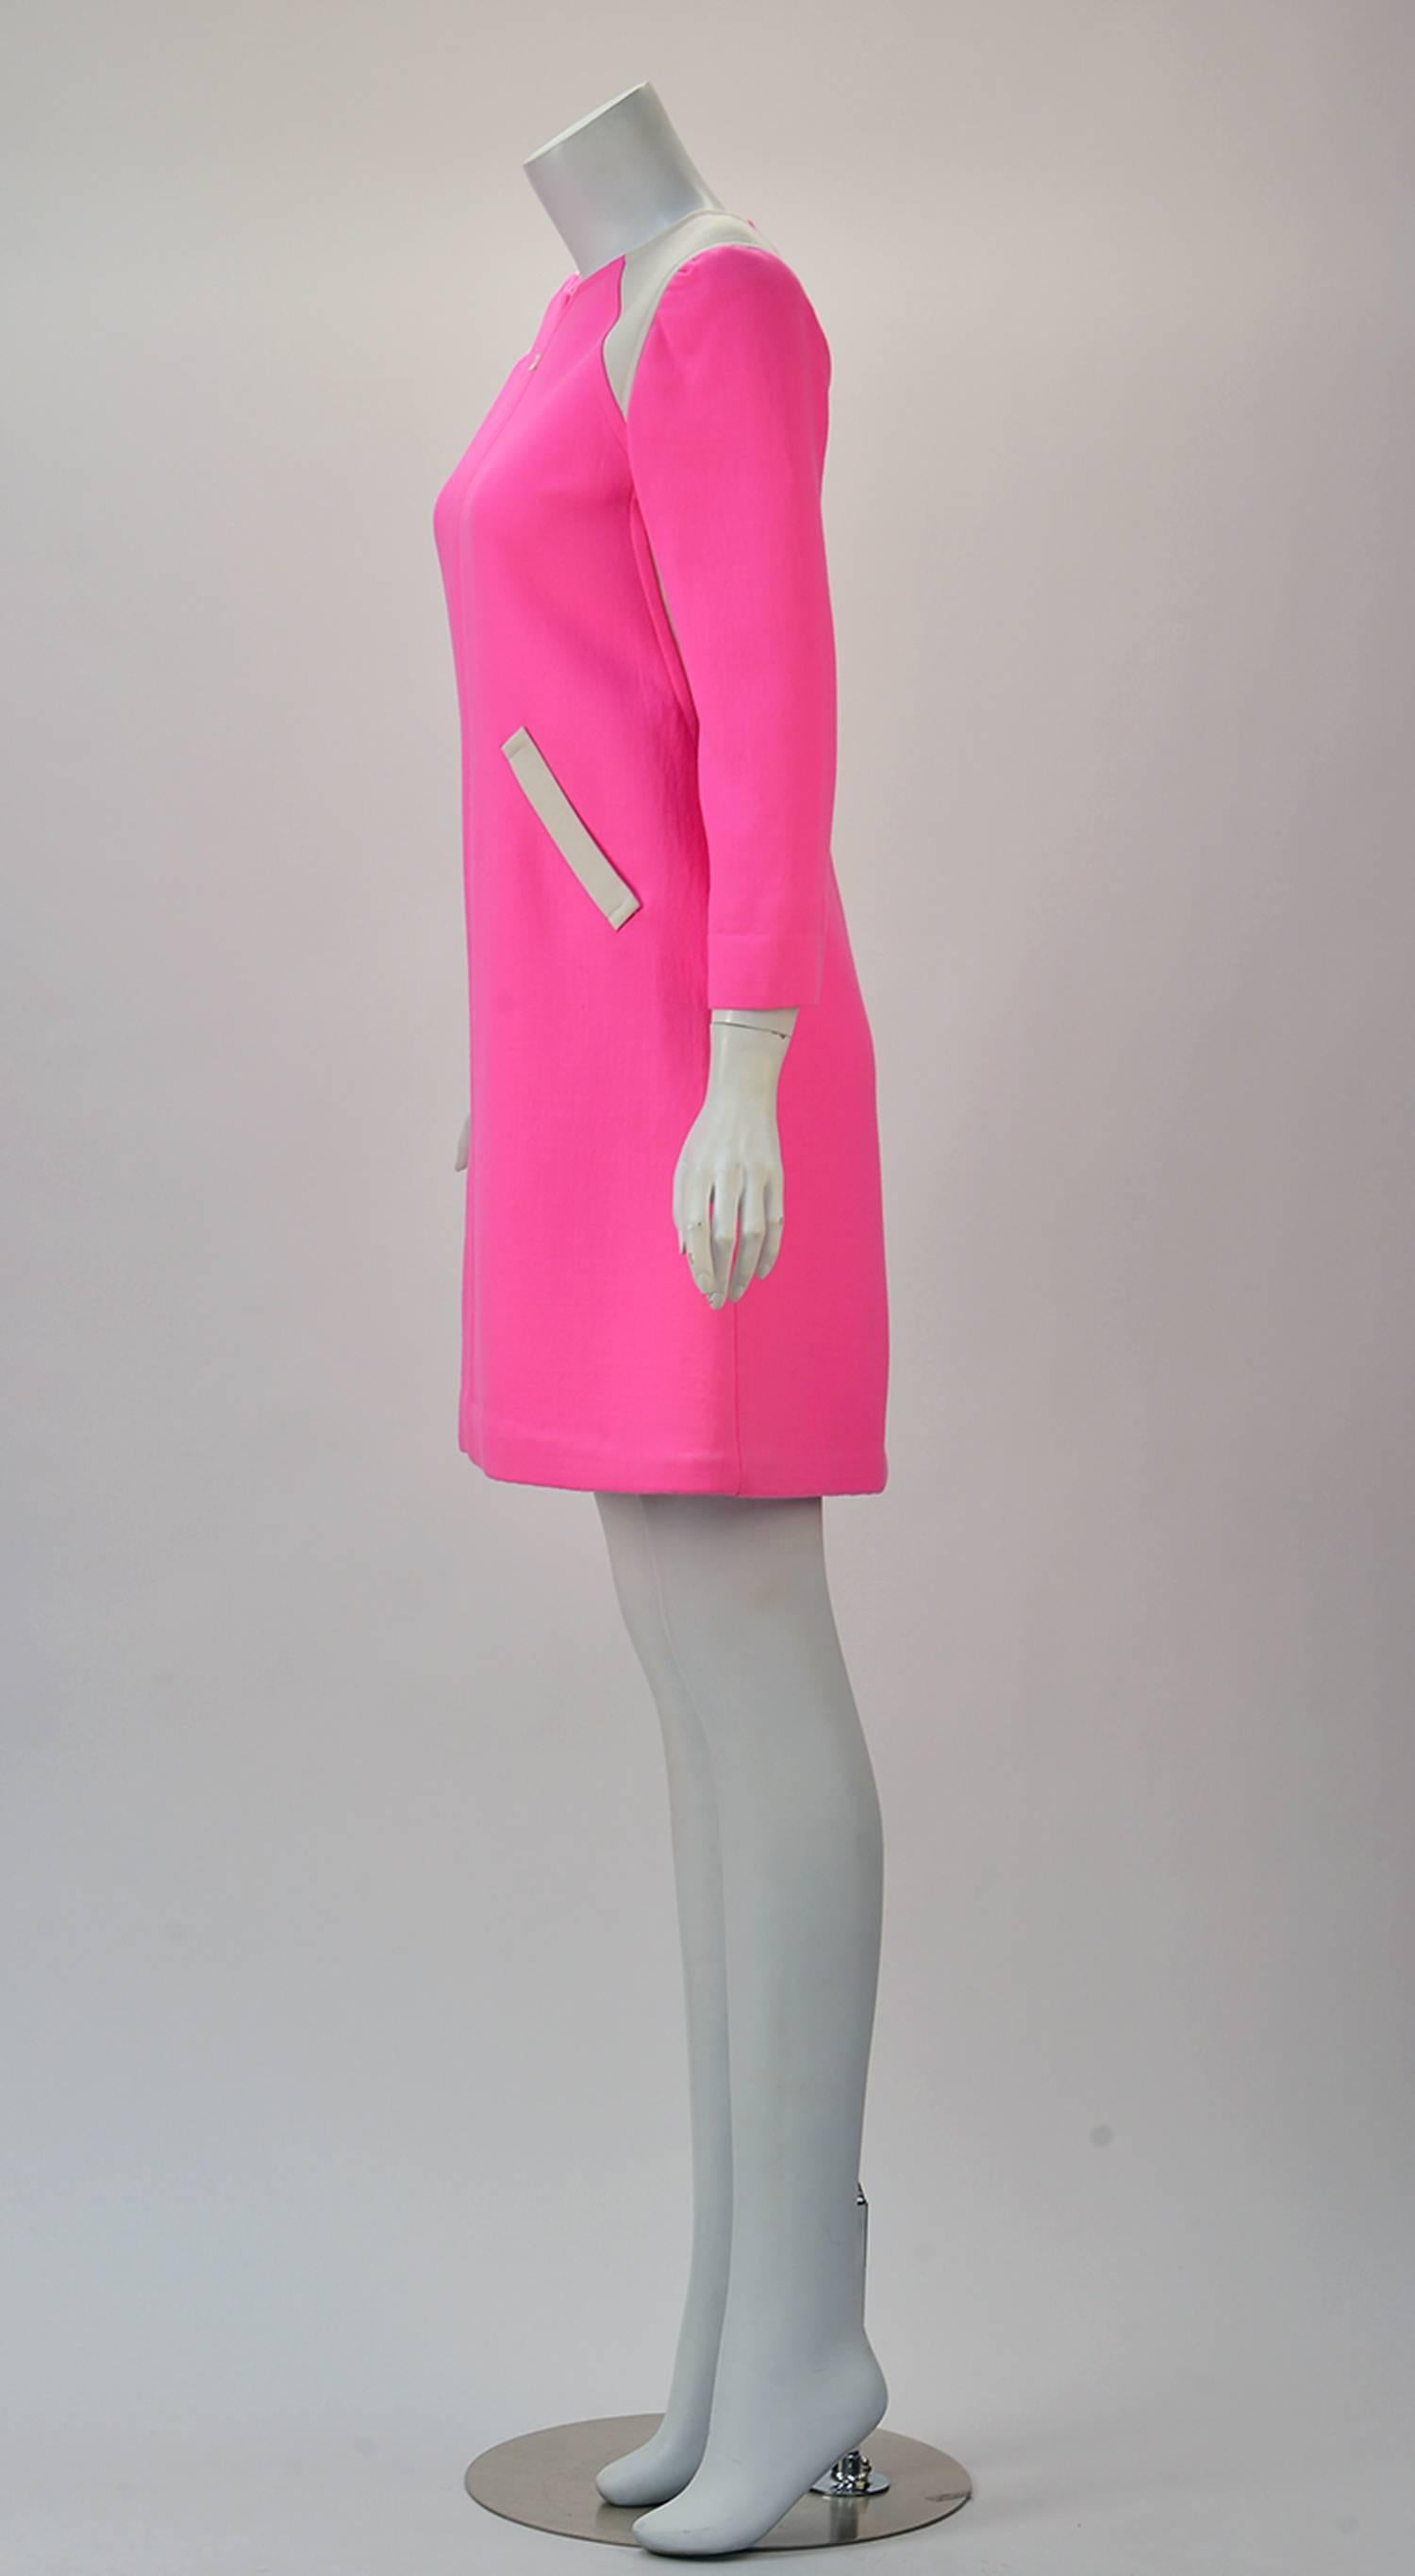 Courreges Paris fashion forward designed hot pink color blocked dress and silver zippered coat. Paying Homage to the sixties this color blocked mini gathers accentuate shoulders drawing the eyes up and down the dress. 

Subtle fit and flare